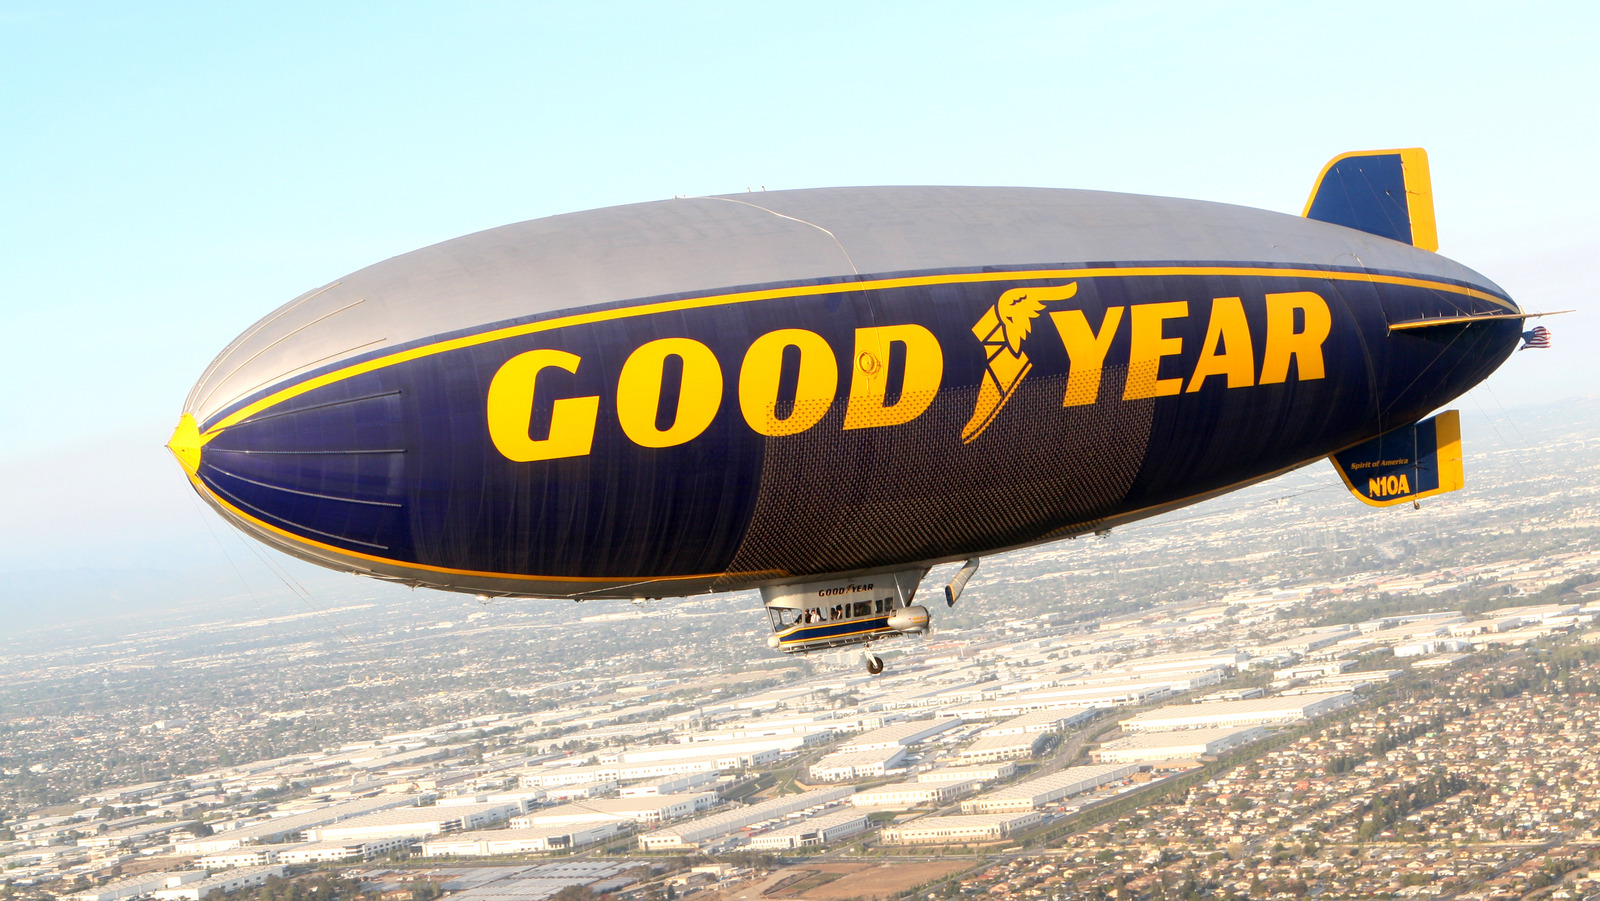 The Mind-Boggling Truth About Blimps